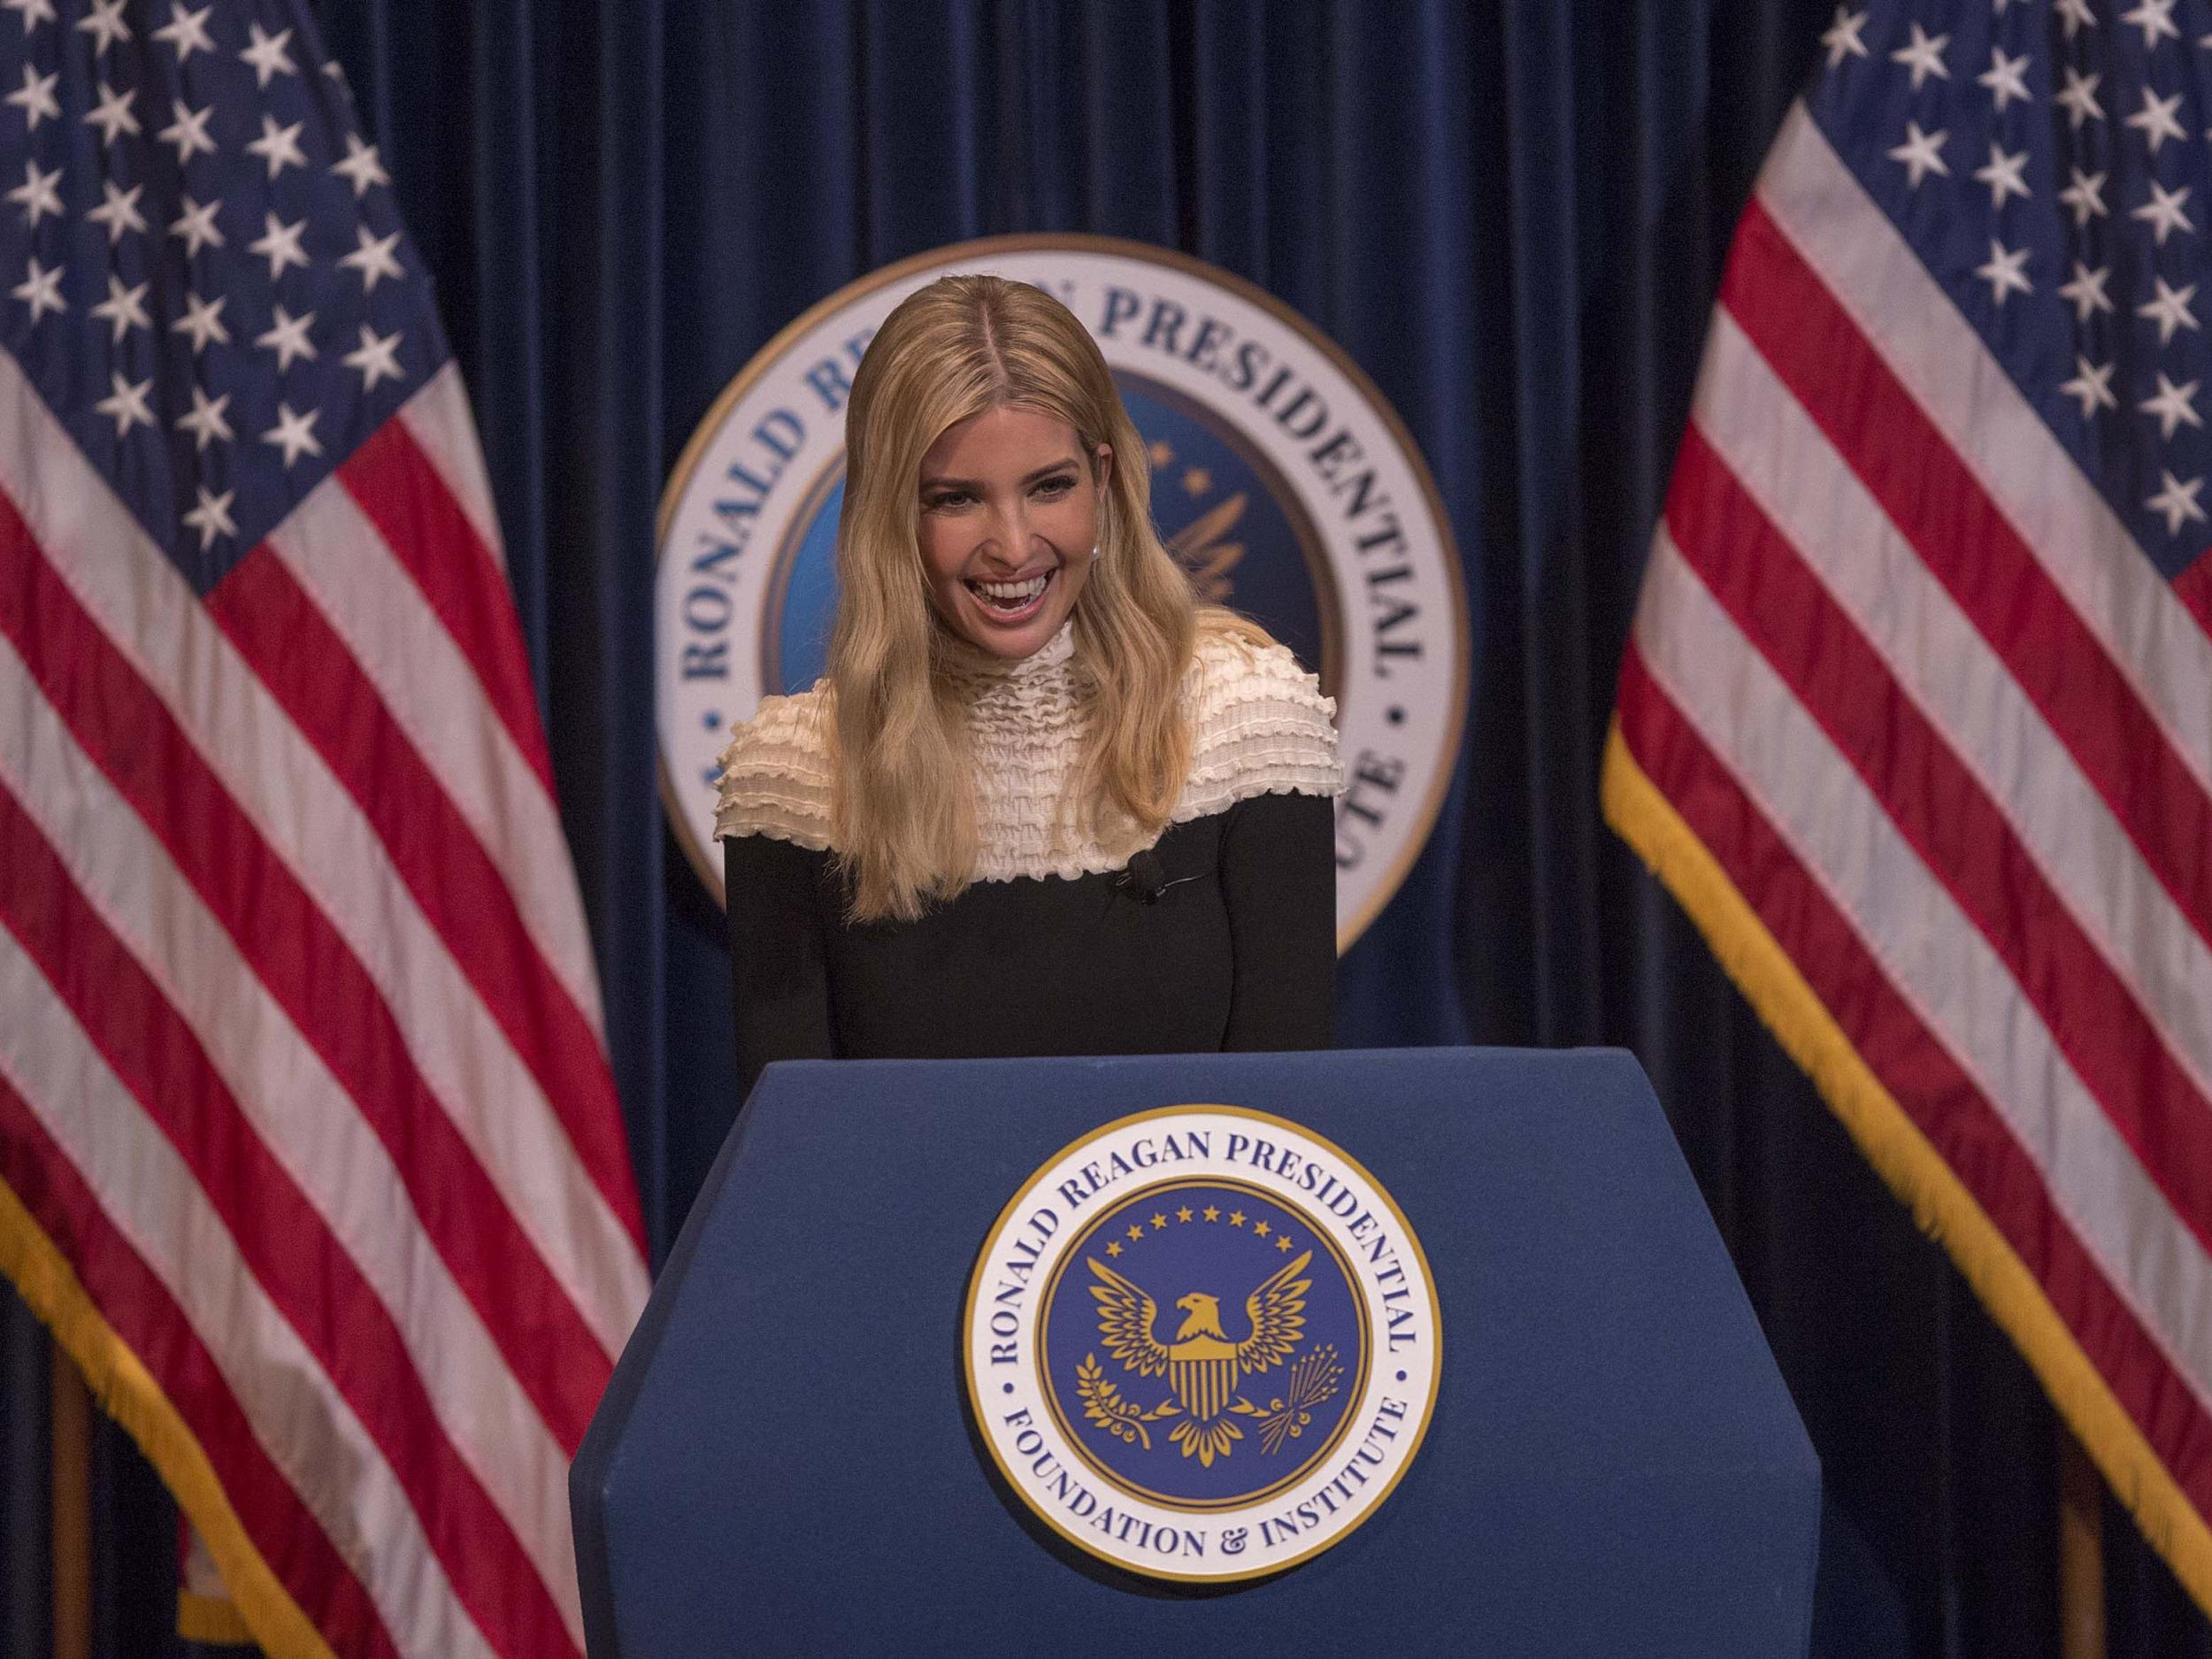 Ivanka Trump appears at the Ronald Reagan Presidential Library in Simi Valley, California, to talk about tax cuts and reform in November (Getty Images)